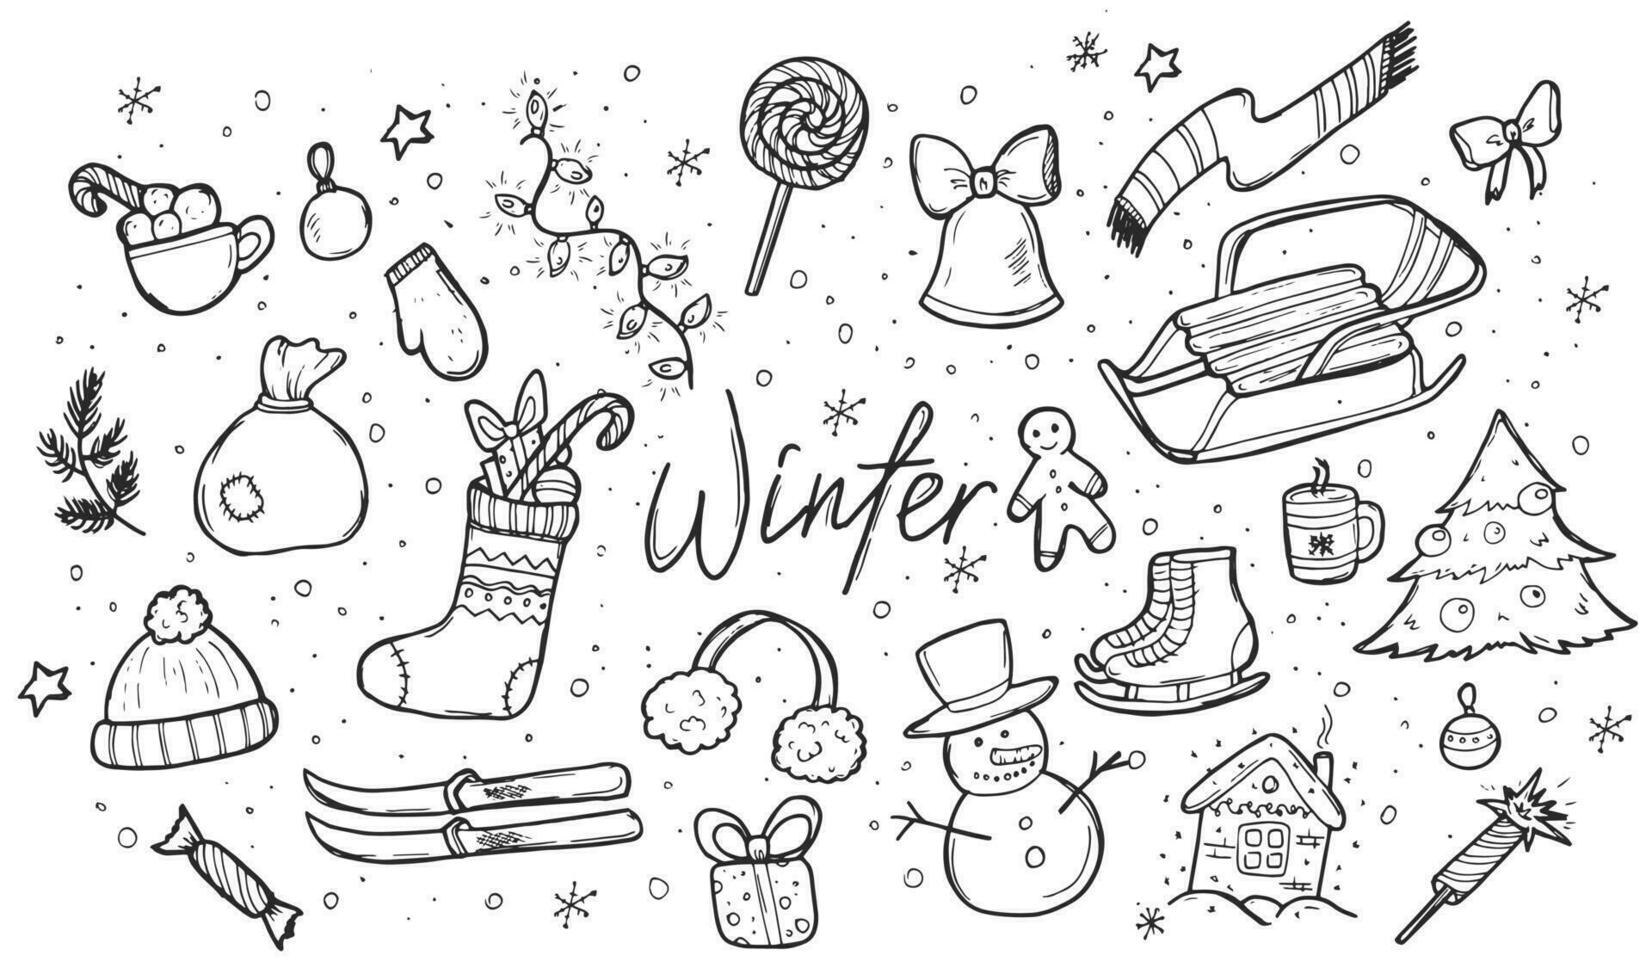 Doodle Winter icon sketches in vector isolated on white background